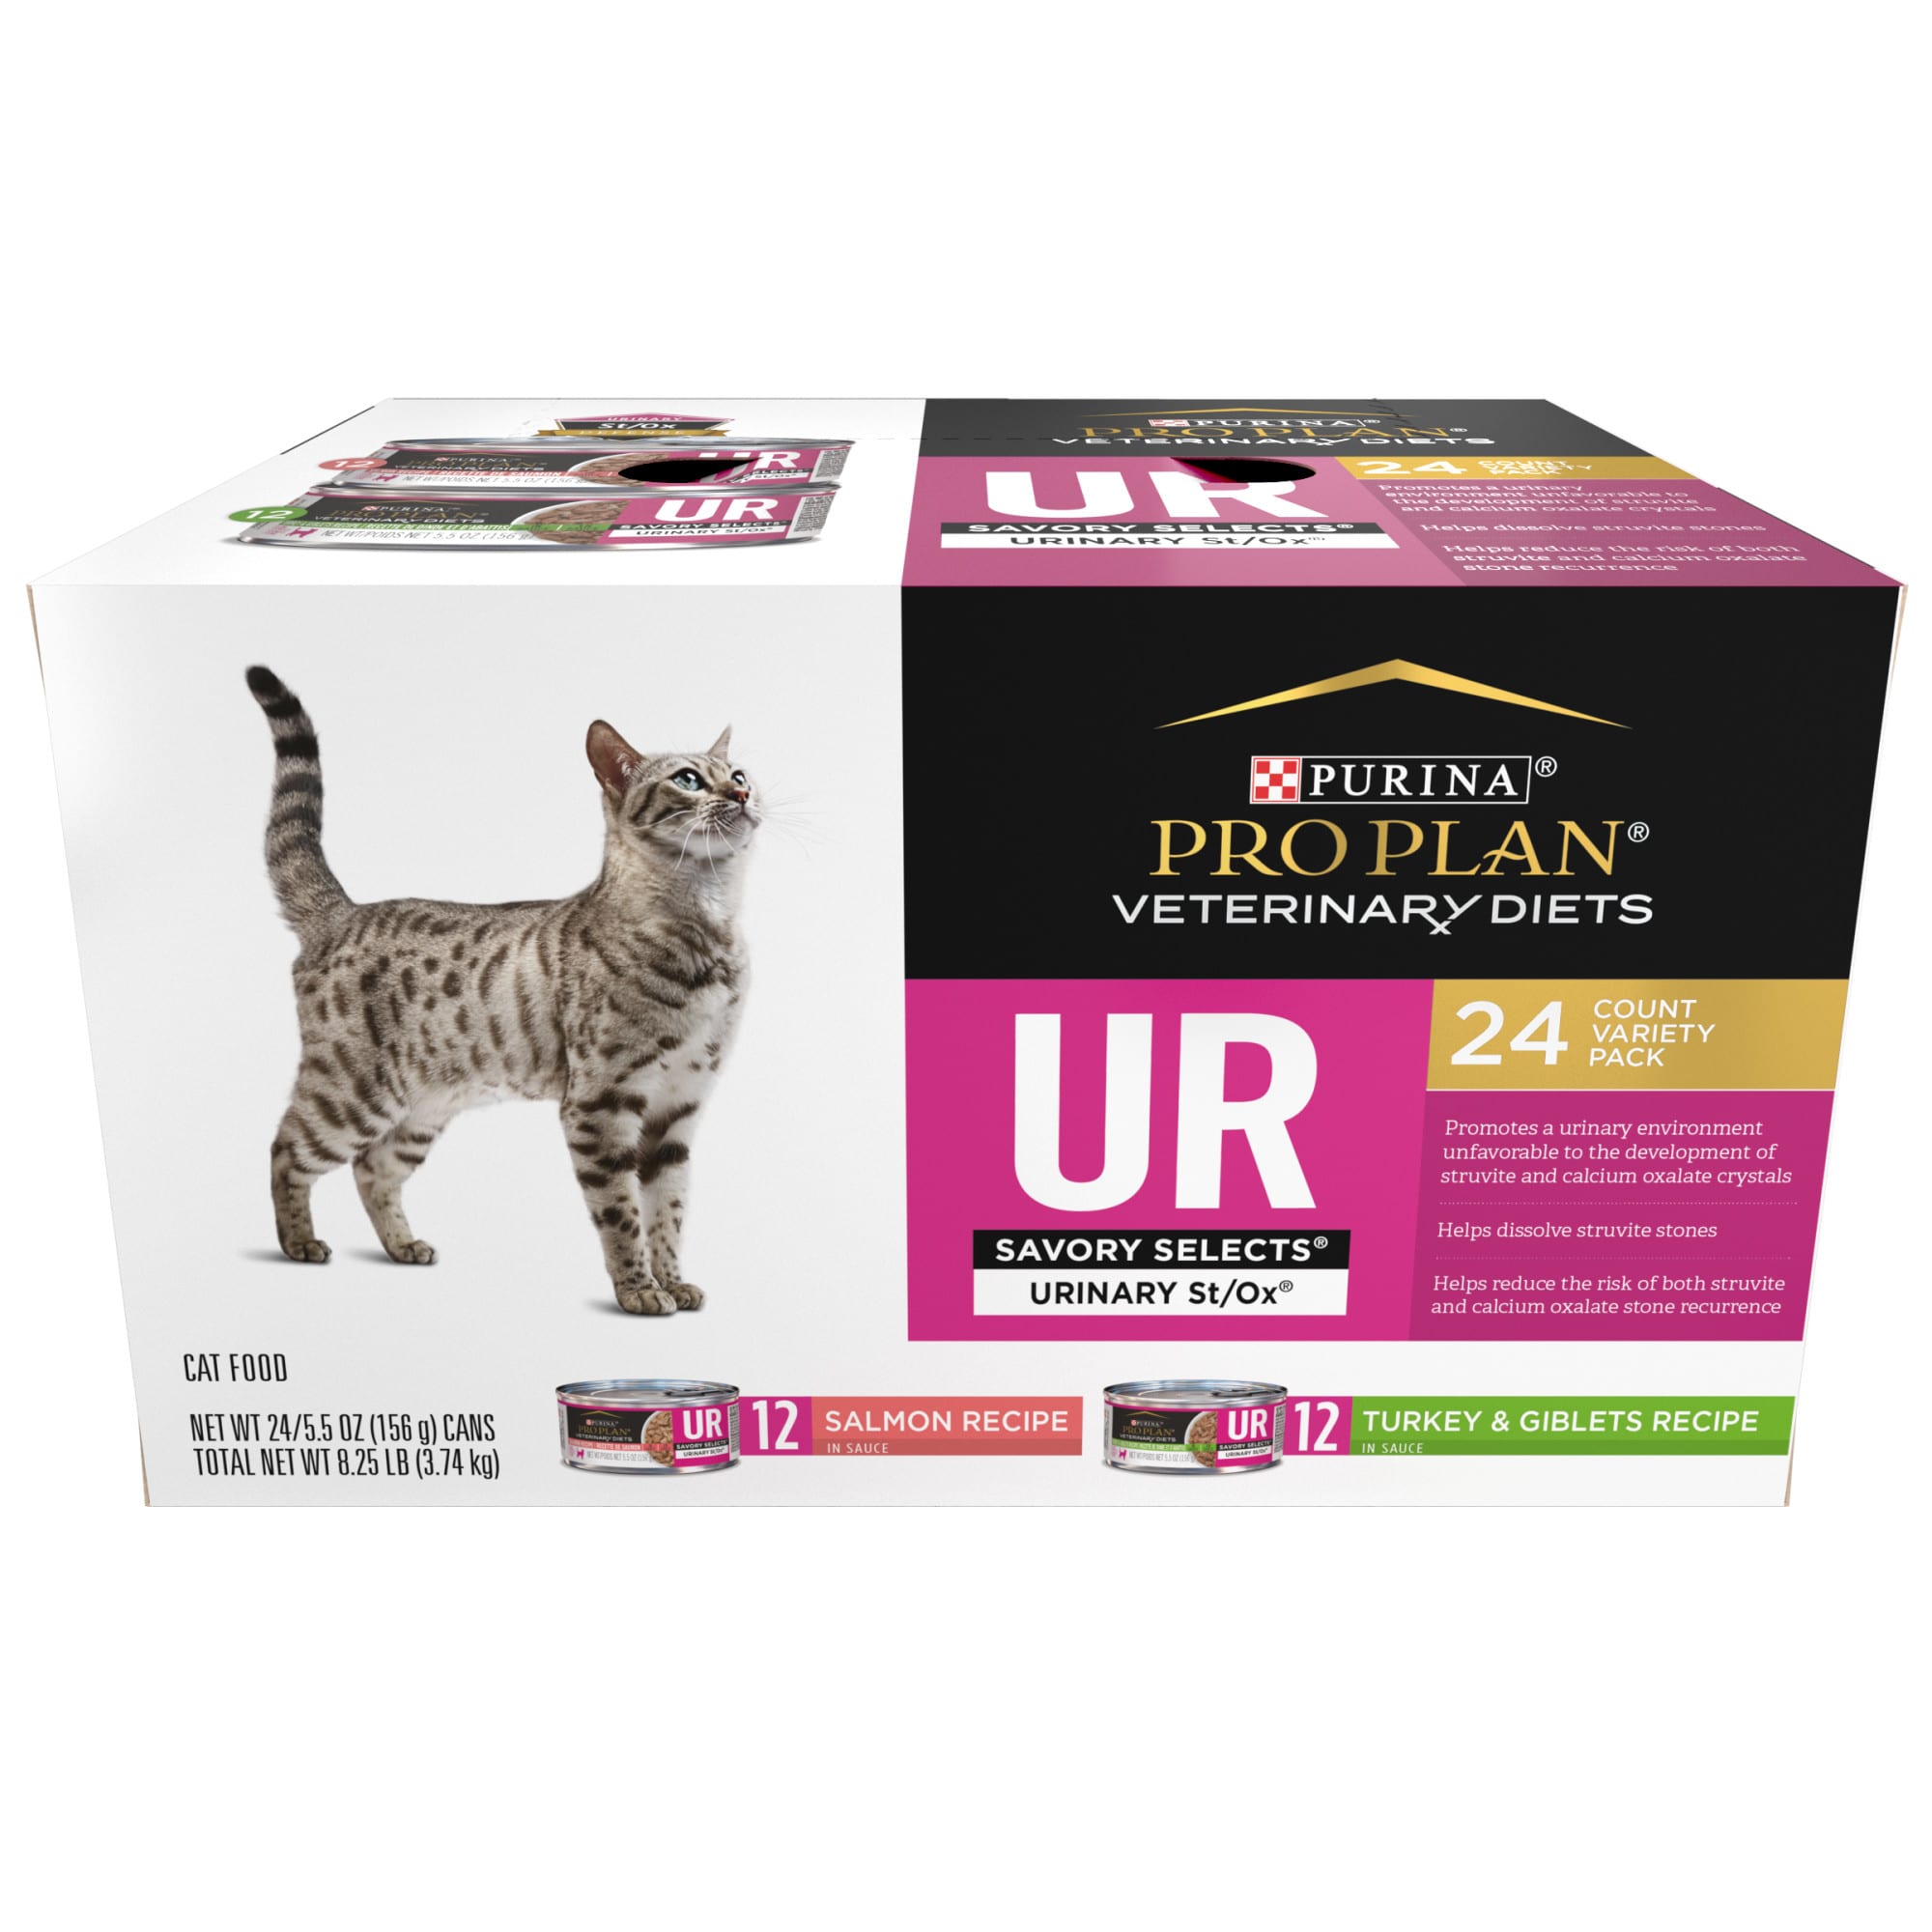 Purina Pro Plan Veterinary Diets UR Urinary St/Ox Savory Selects Wet ...